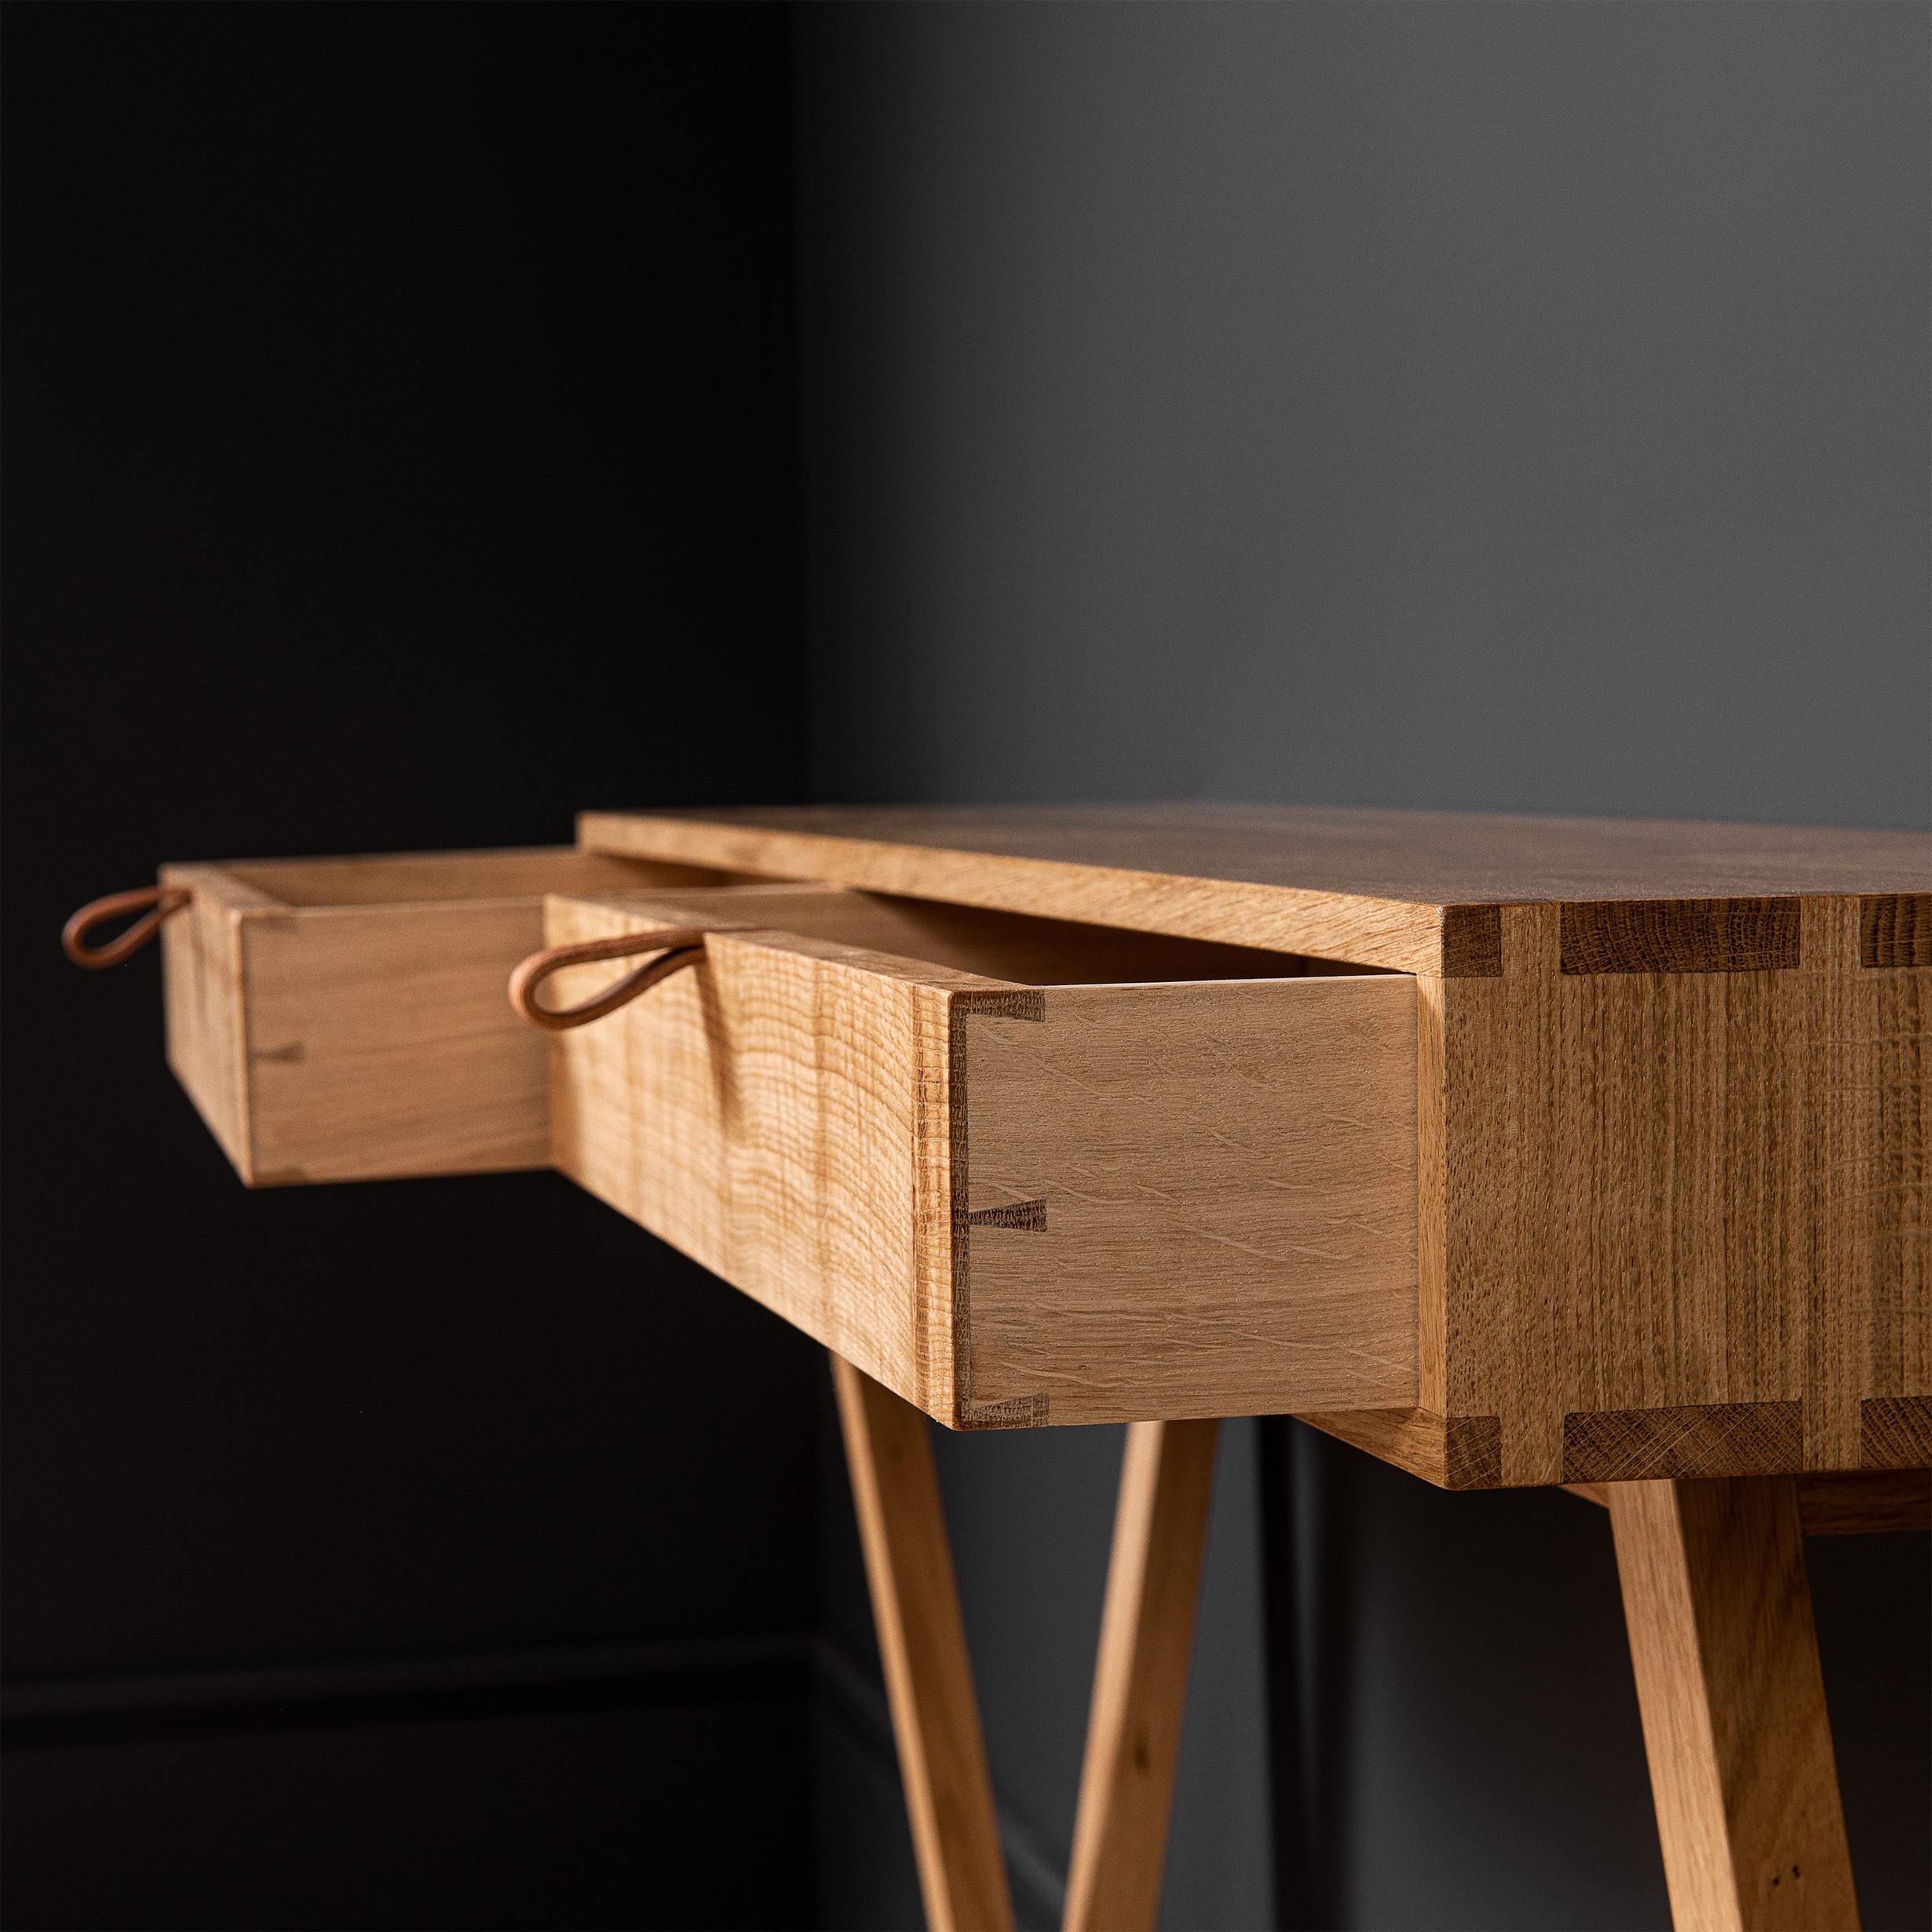 A larger incarnation of our modernist handcrafted English oak vanity console table. Designed and handmade in England using skilled traditional furniture making techniques. Completely handcrafted from the finest fully quarter-sawn English oak. Hand